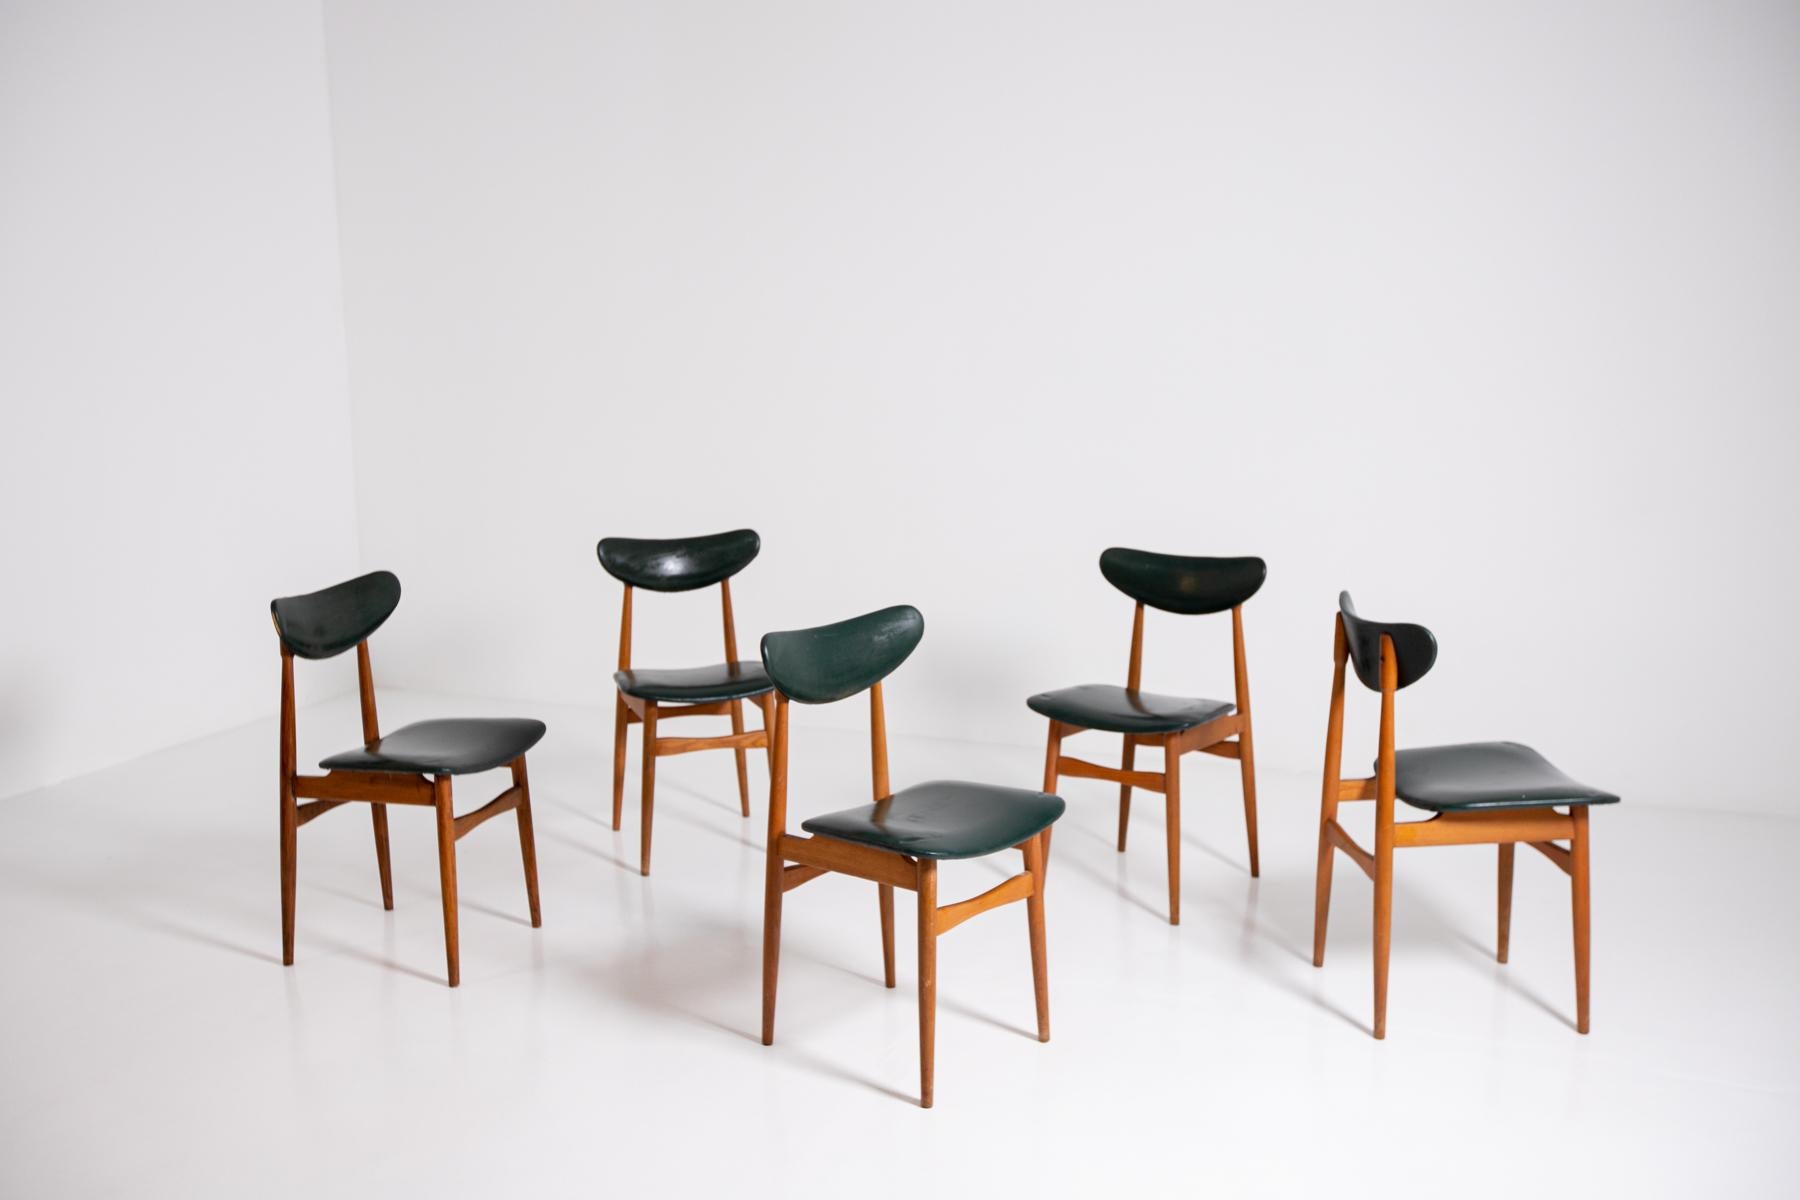 Nordic modernist set of five chairs from the 1950s. The chairs are in their original condition, also its upholstery is original of the time. 
The seat and back are made of green leather in excellent condition. The frame is made of cherrywood. The